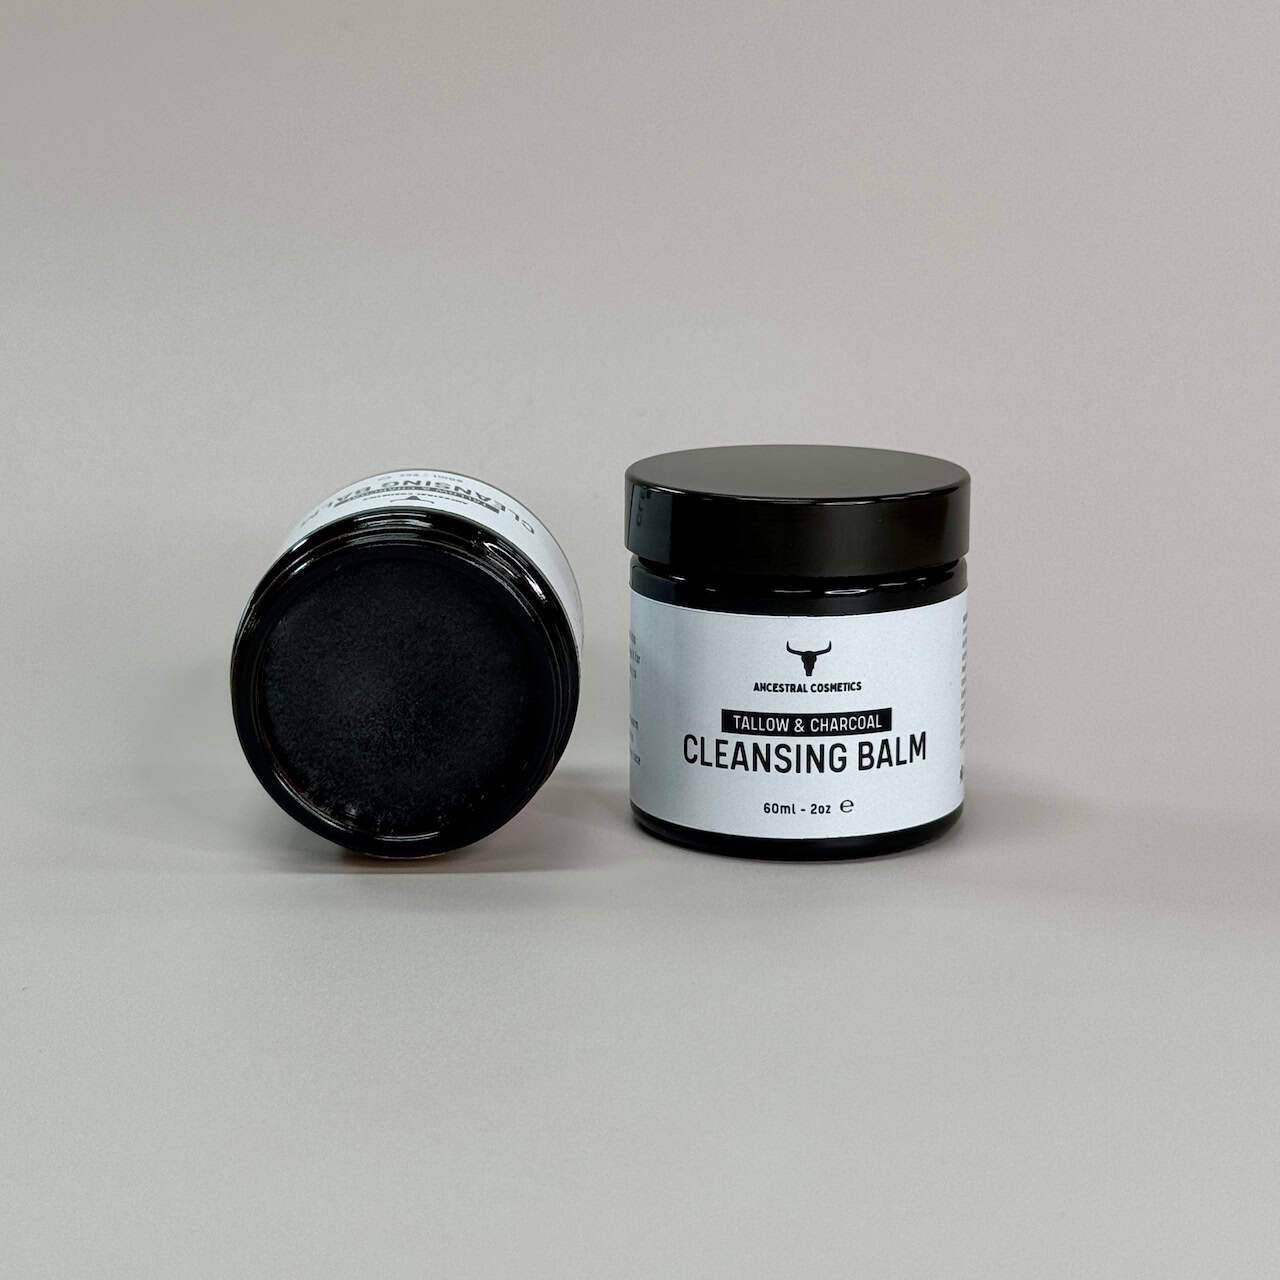 Tallow & Charcoal Cleansing Balm